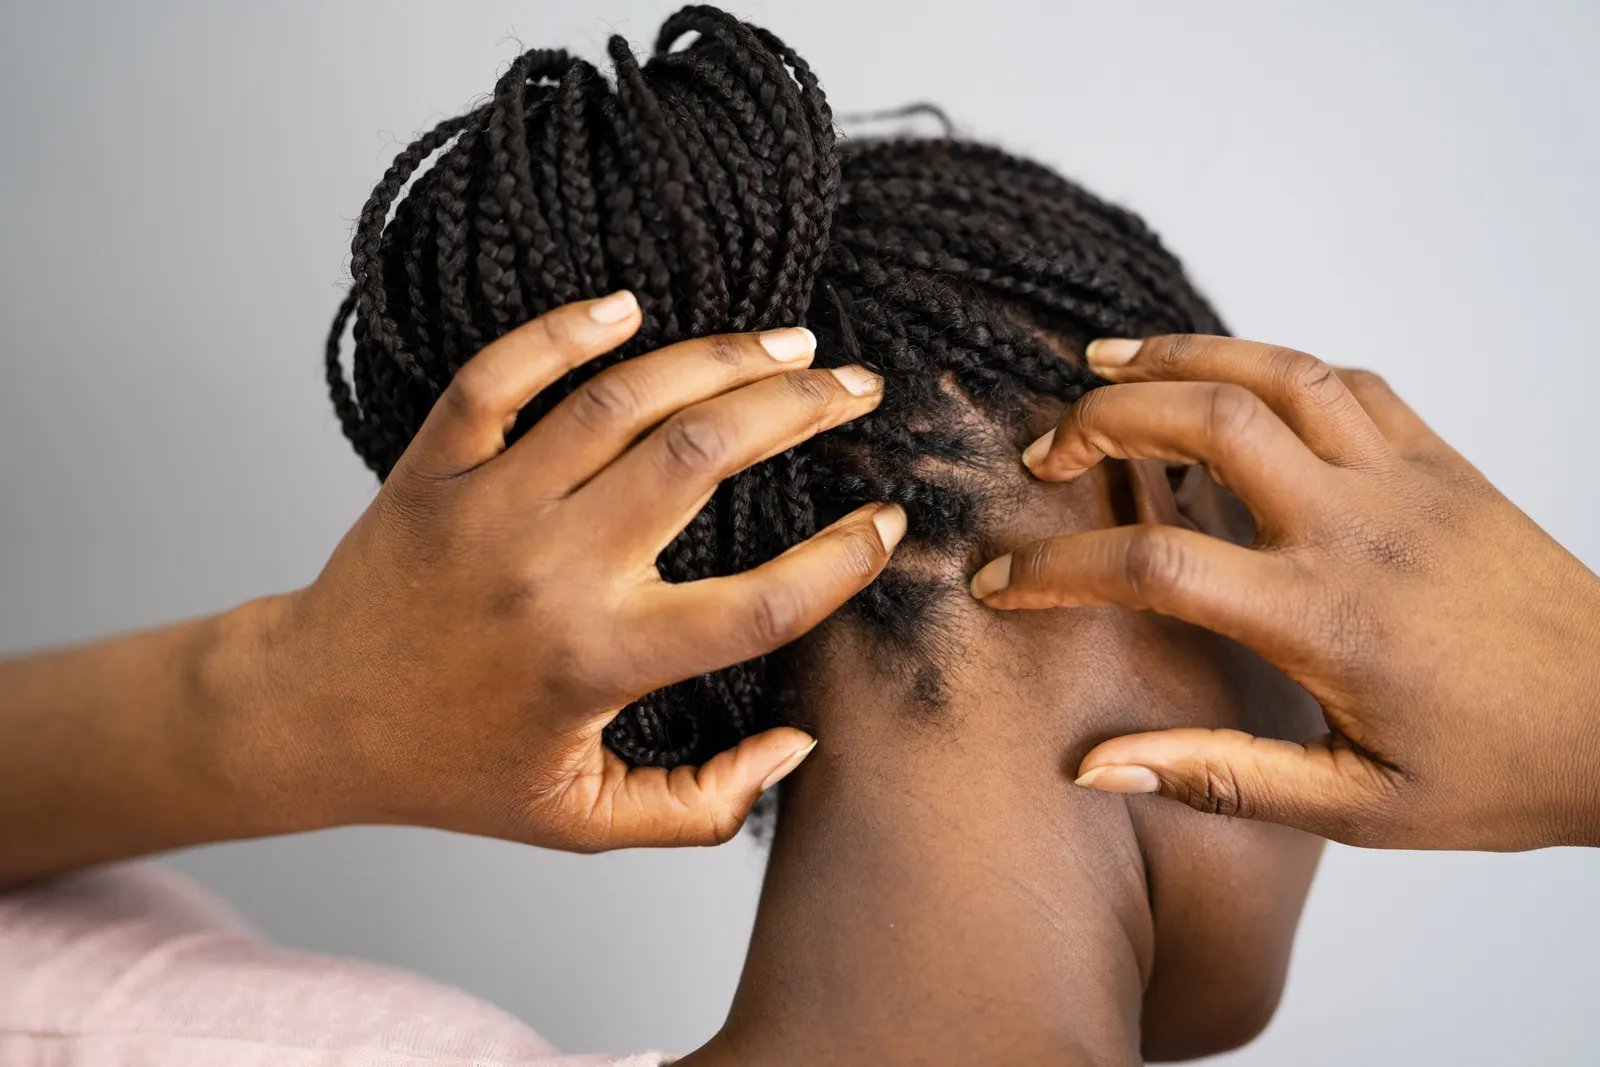 Surprising Truth: Lice And African Americans - What You Need To Know